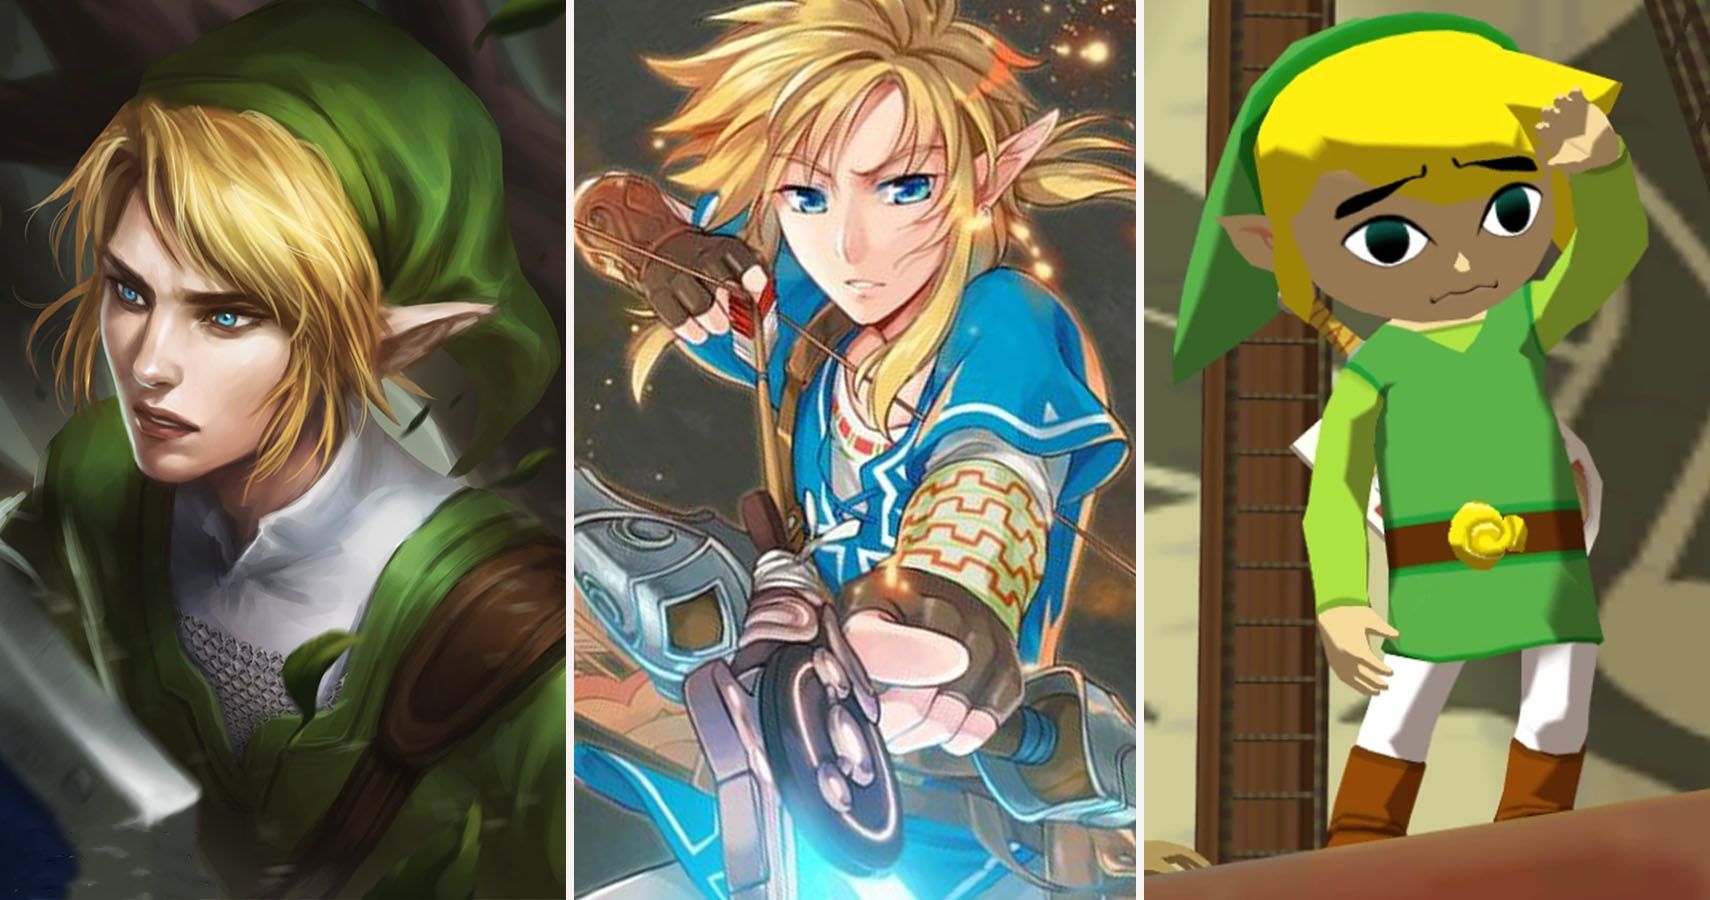 Legend Of Zelda - Ranking Every Link From Worst To Best